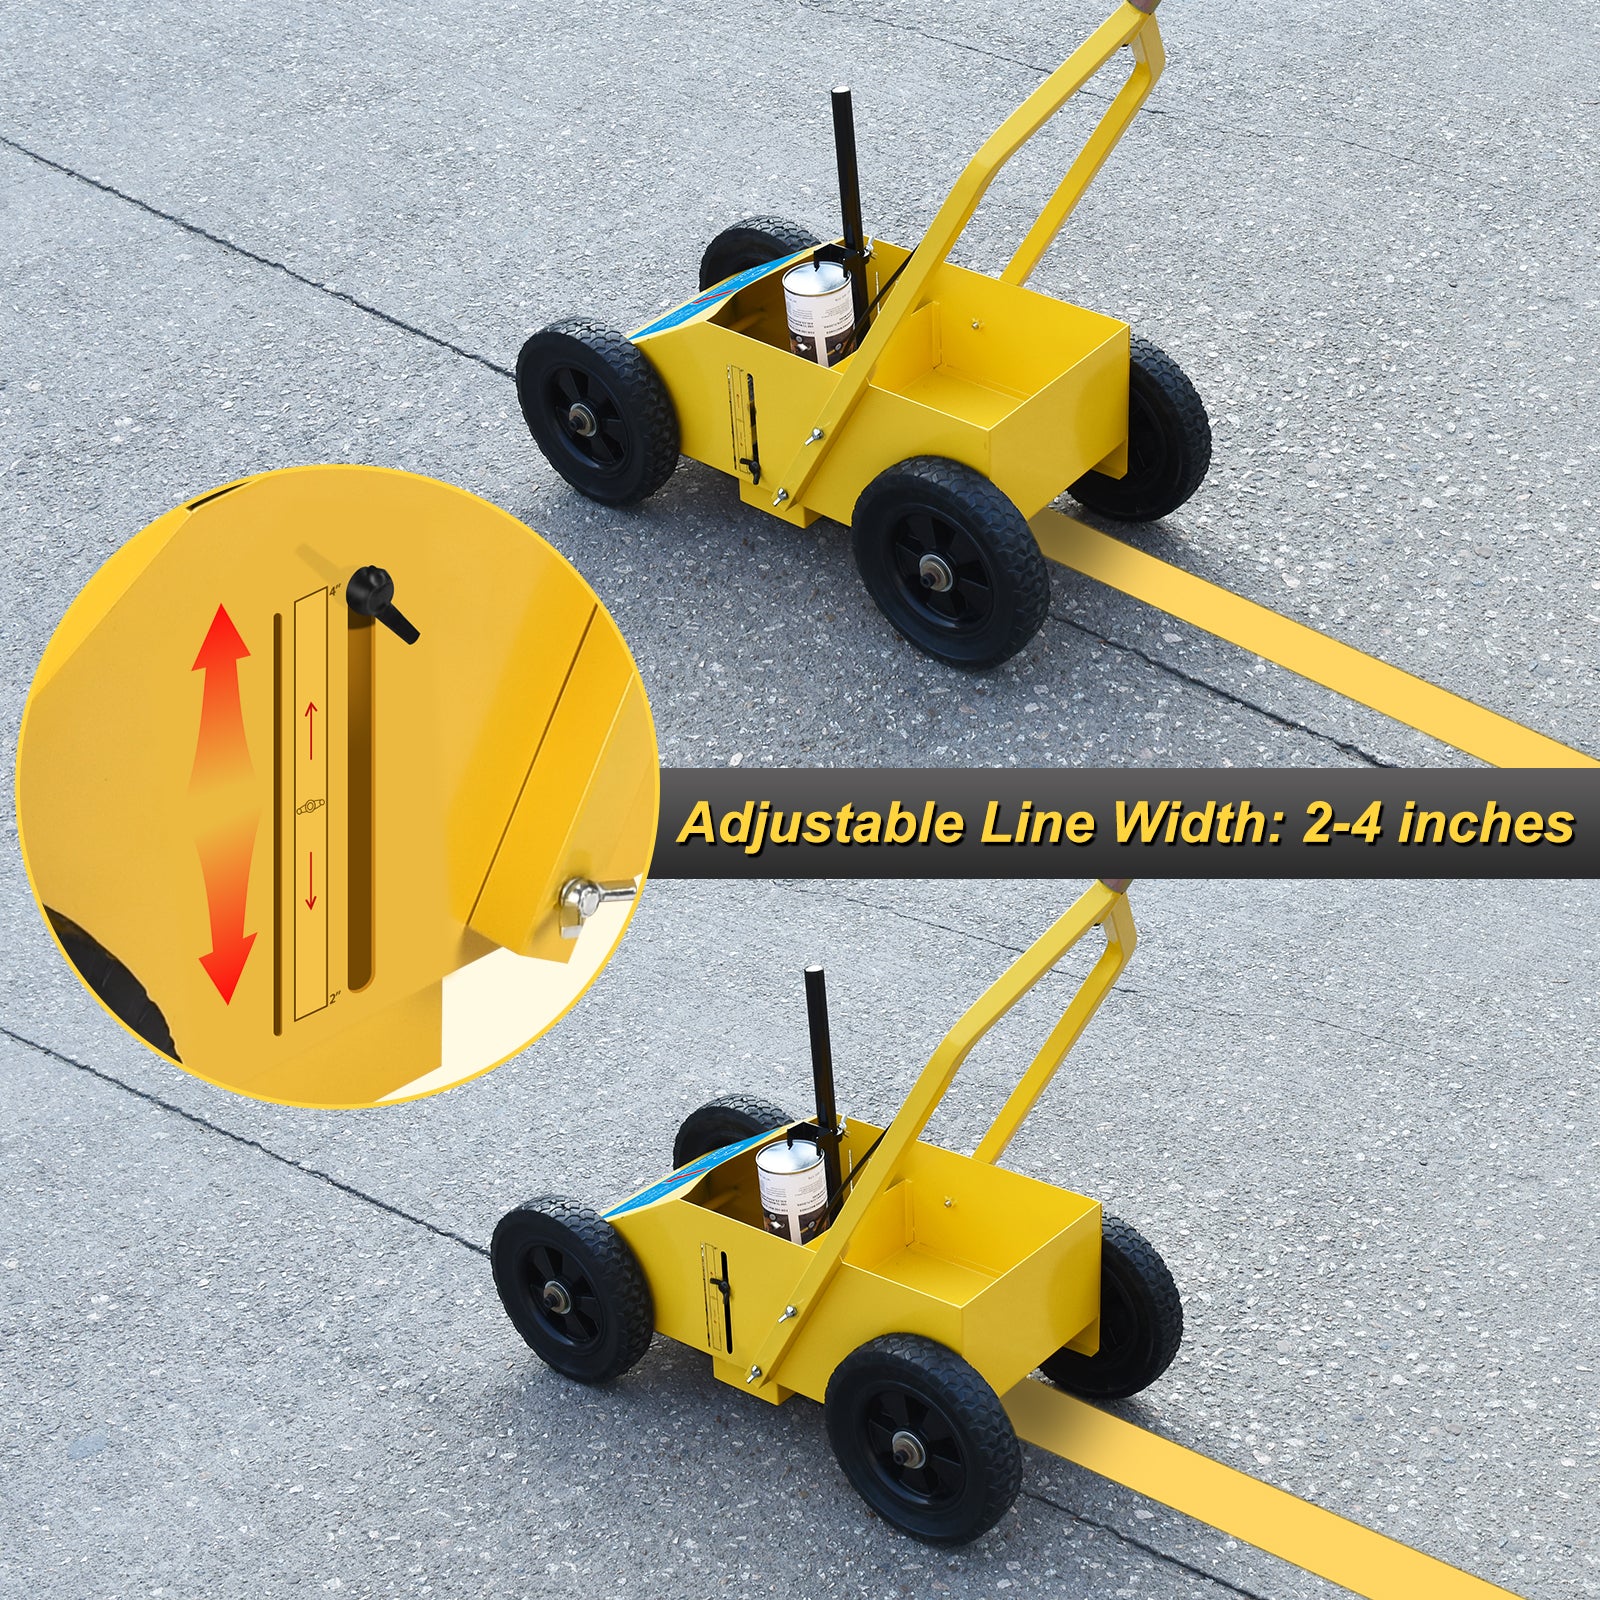 GADFISH Heavy Duty Striping Line Marking Machine, Compatible with Inverted Marking Spray Paint, Parking Lot Striping Machine for Fast and Accurate Marking, Line Striper - Yellow